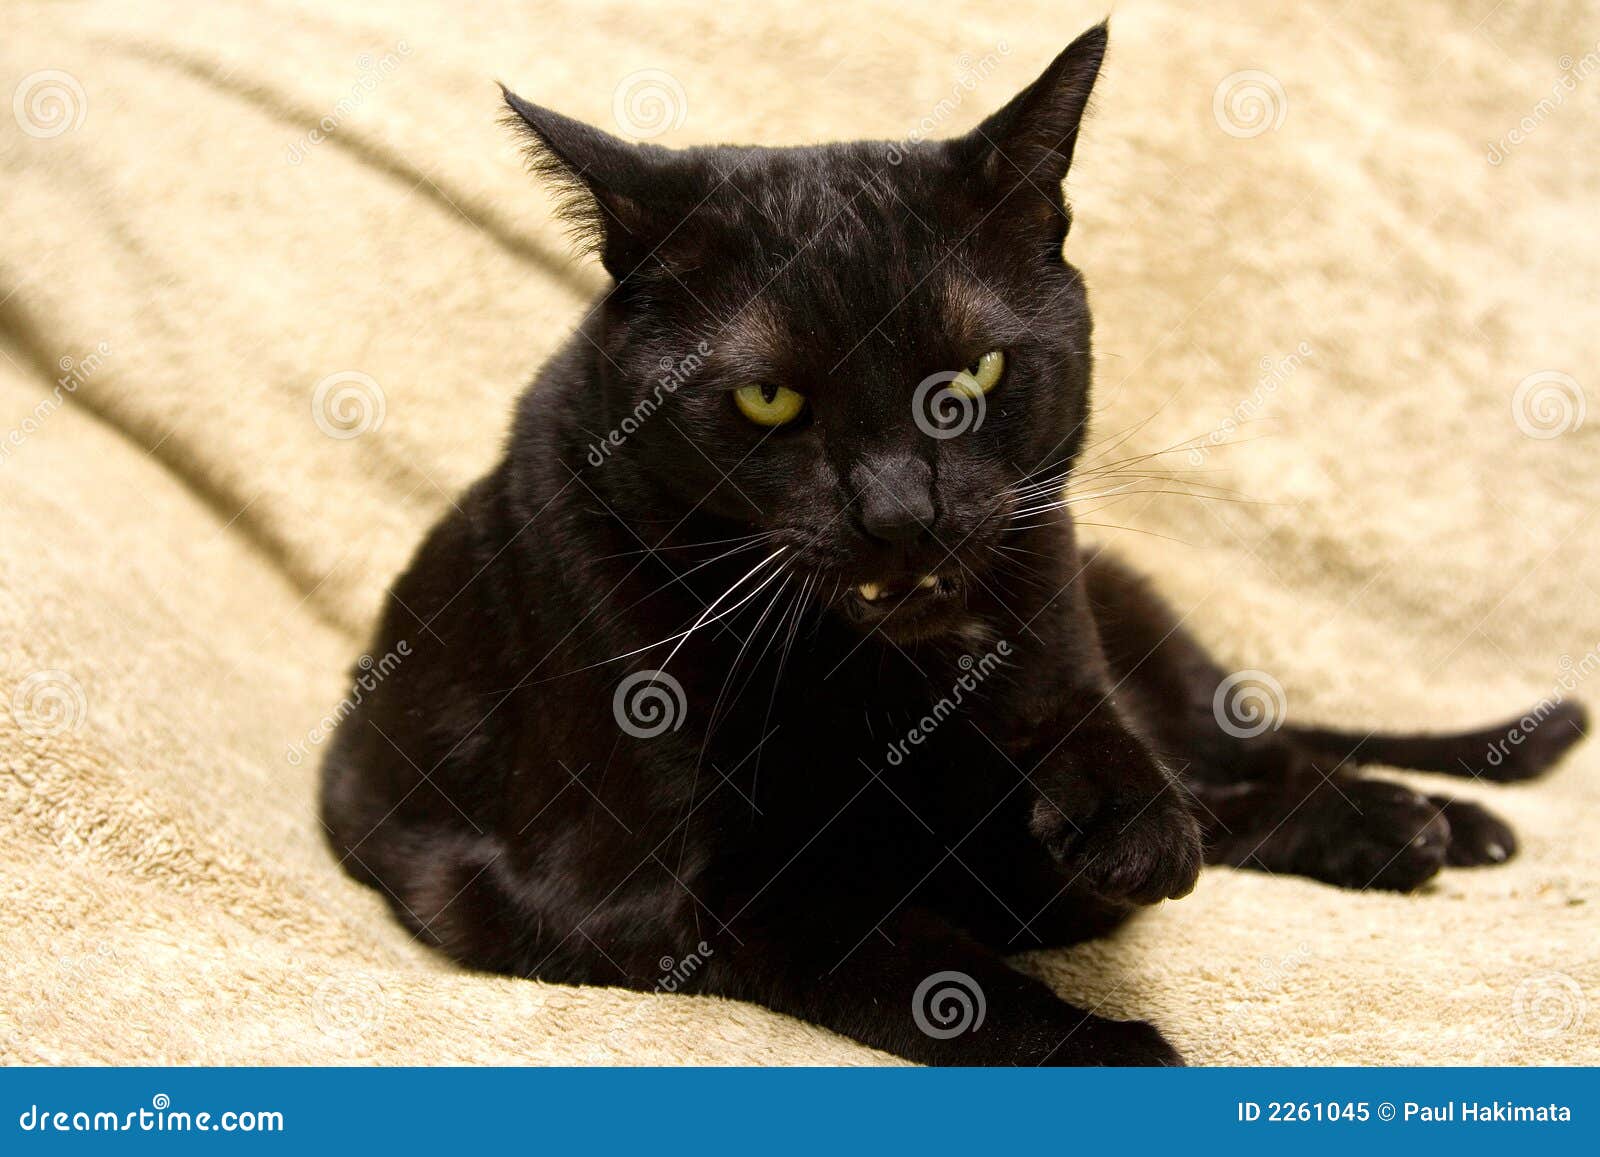 Mean Black Cat Royalty Free Stock Photo - Image: 2261045